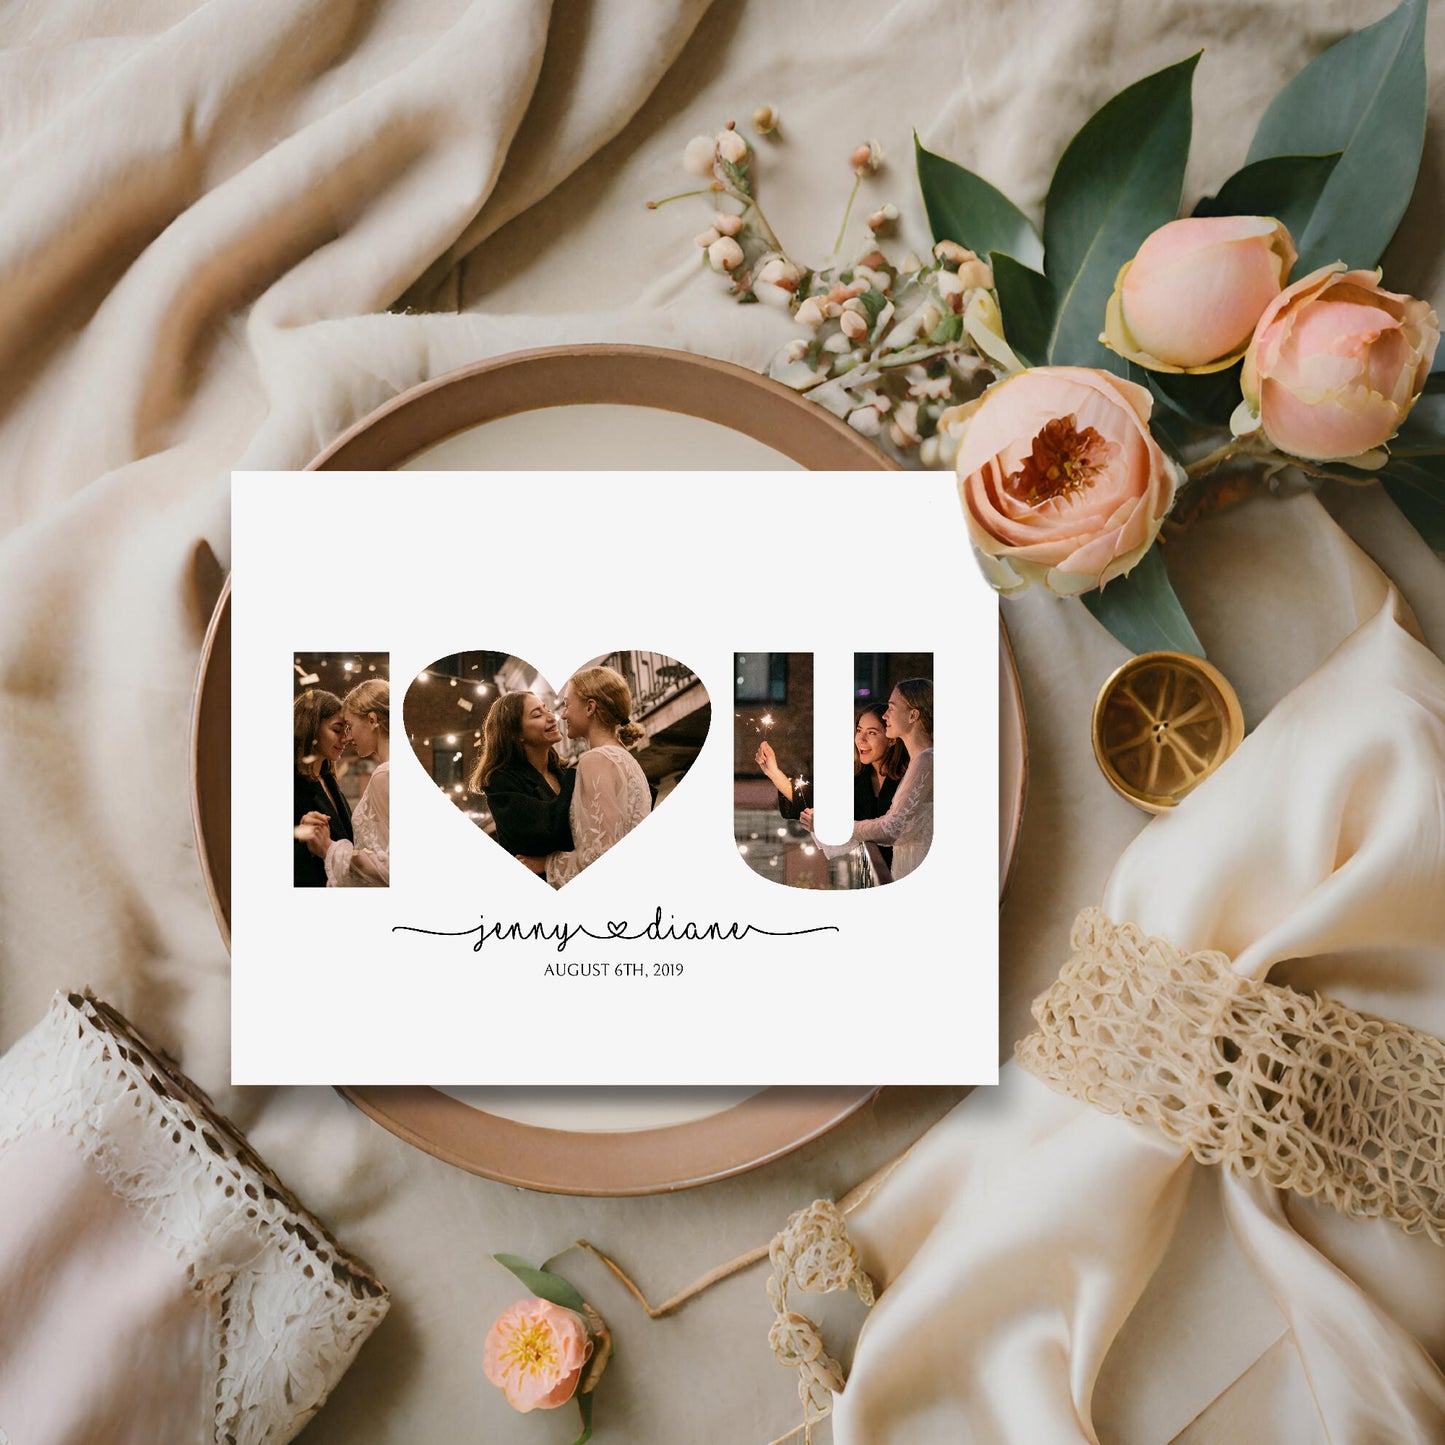 I Heart U Editable Photo Collage Template Anniversary Gift by Playful Pixie Studio